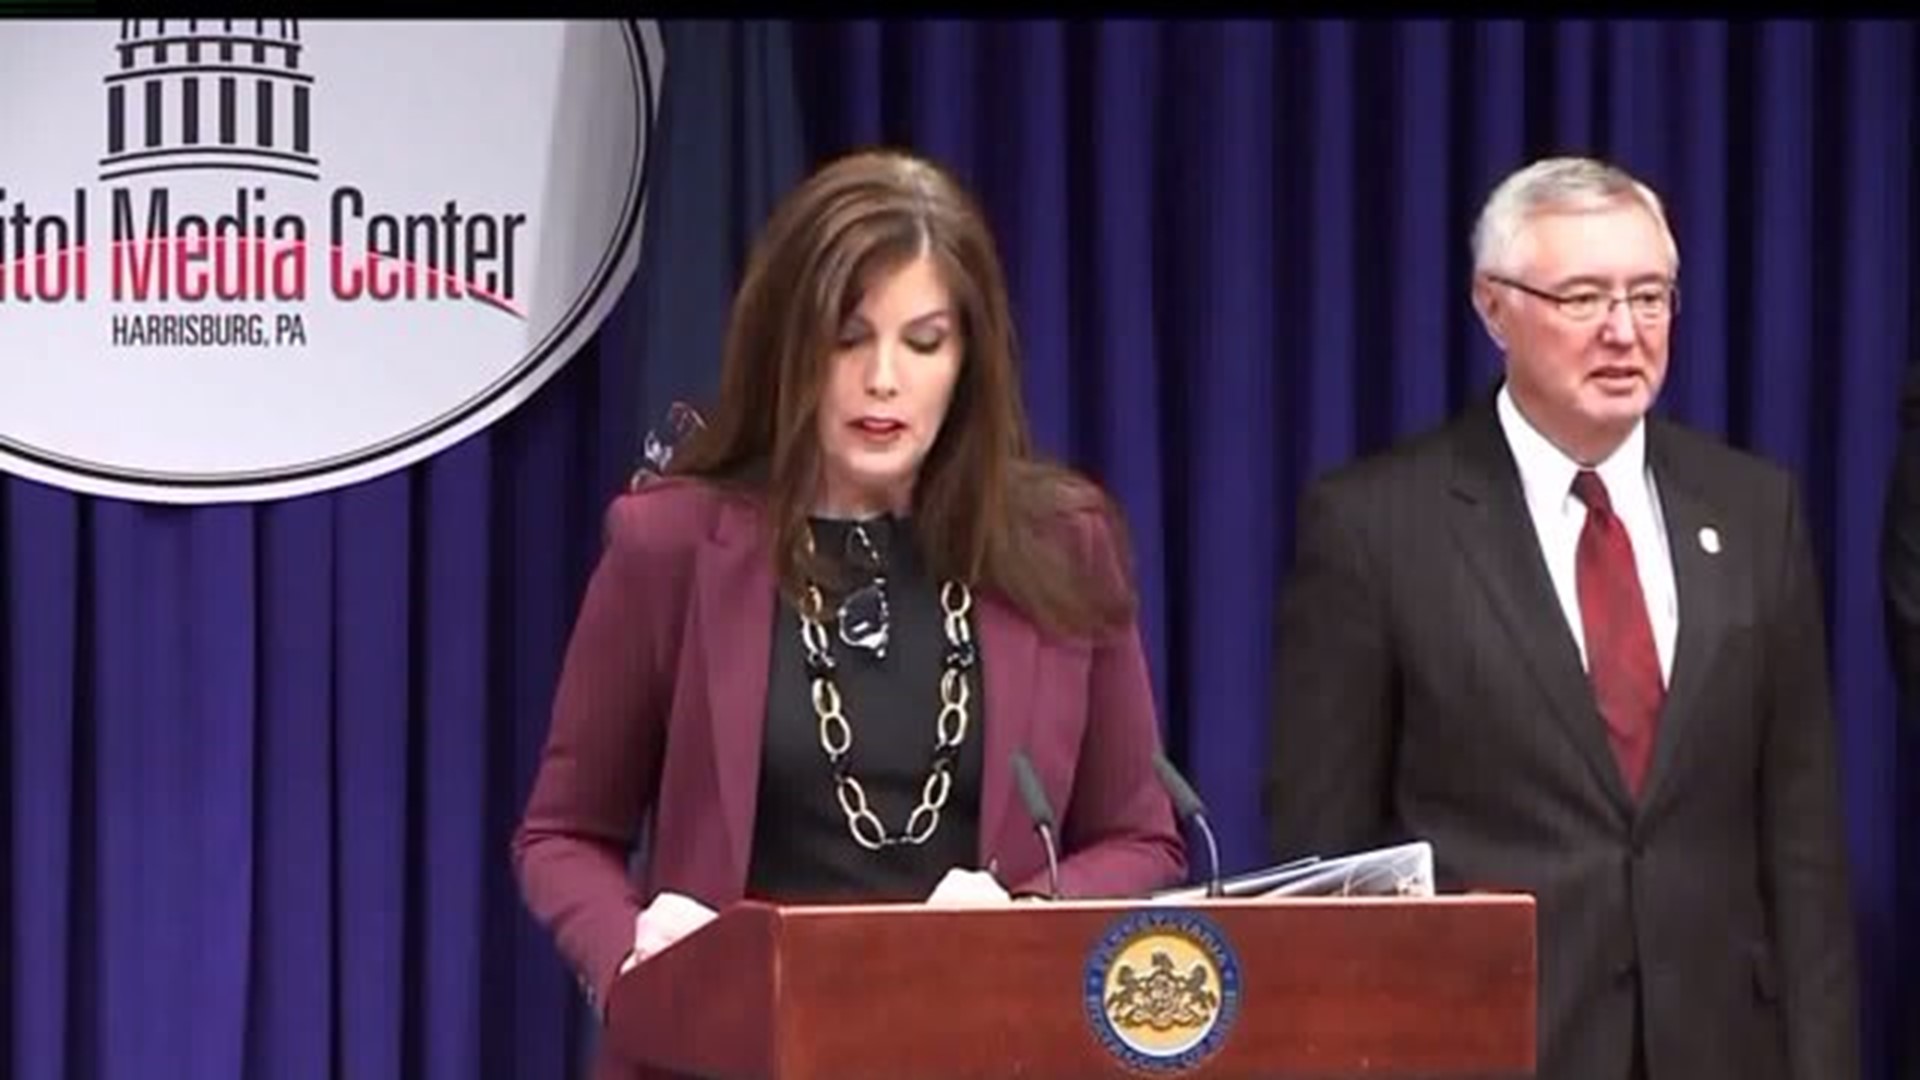 Senate hearings to determine if AG Kane can be forced out